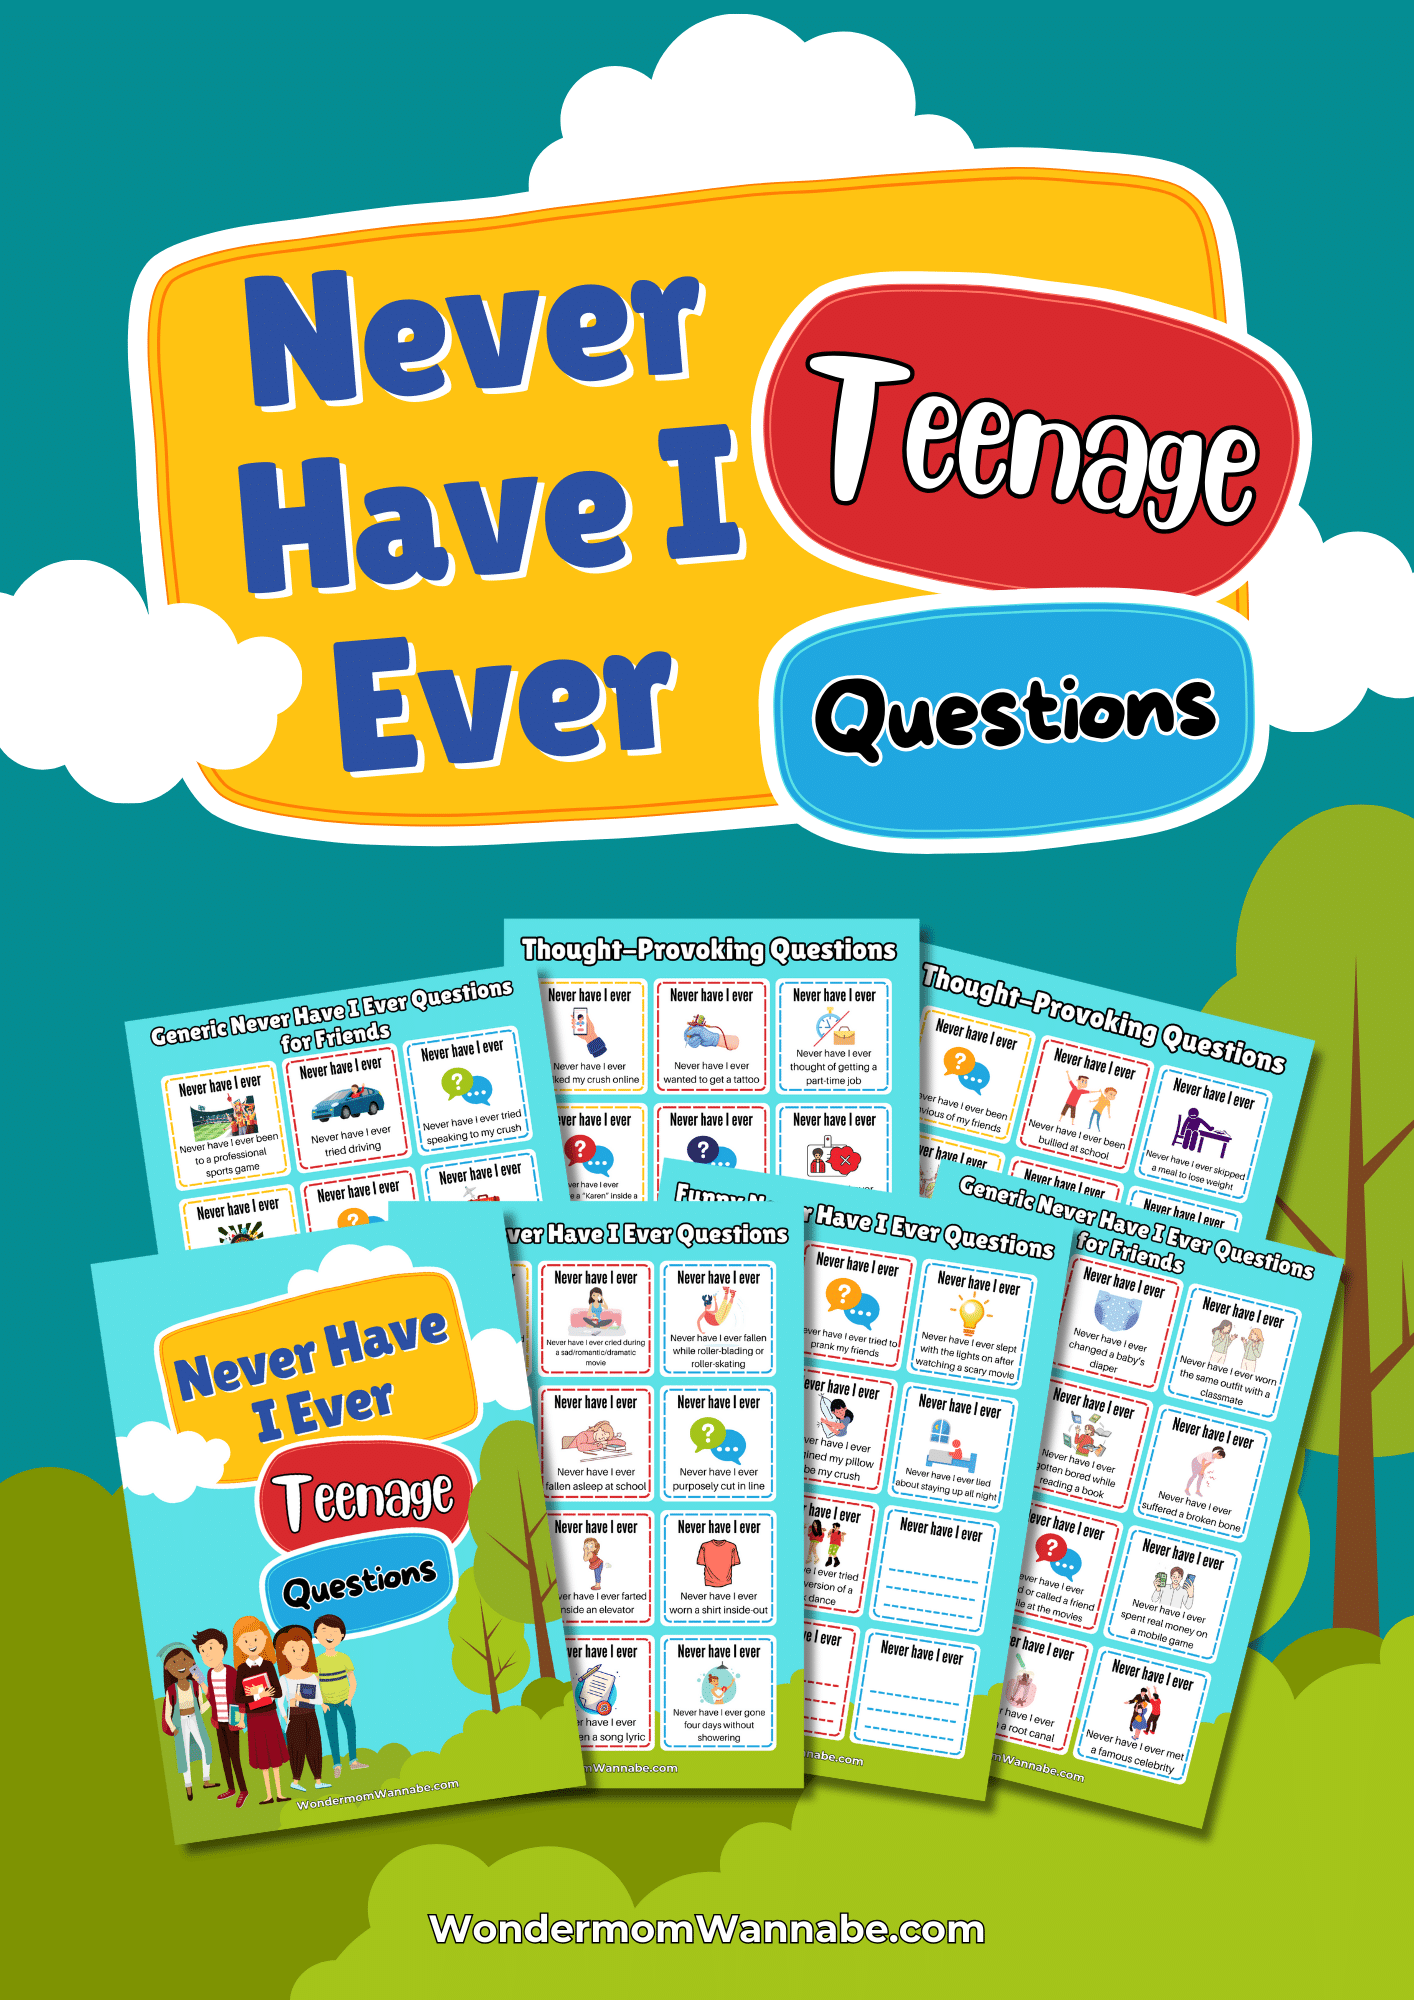 Never Have I Ever Teenage Questions: Get ready for a fun-filled session with these thought-provoking and exciting never have I ever questions specifically designed for teenagers.